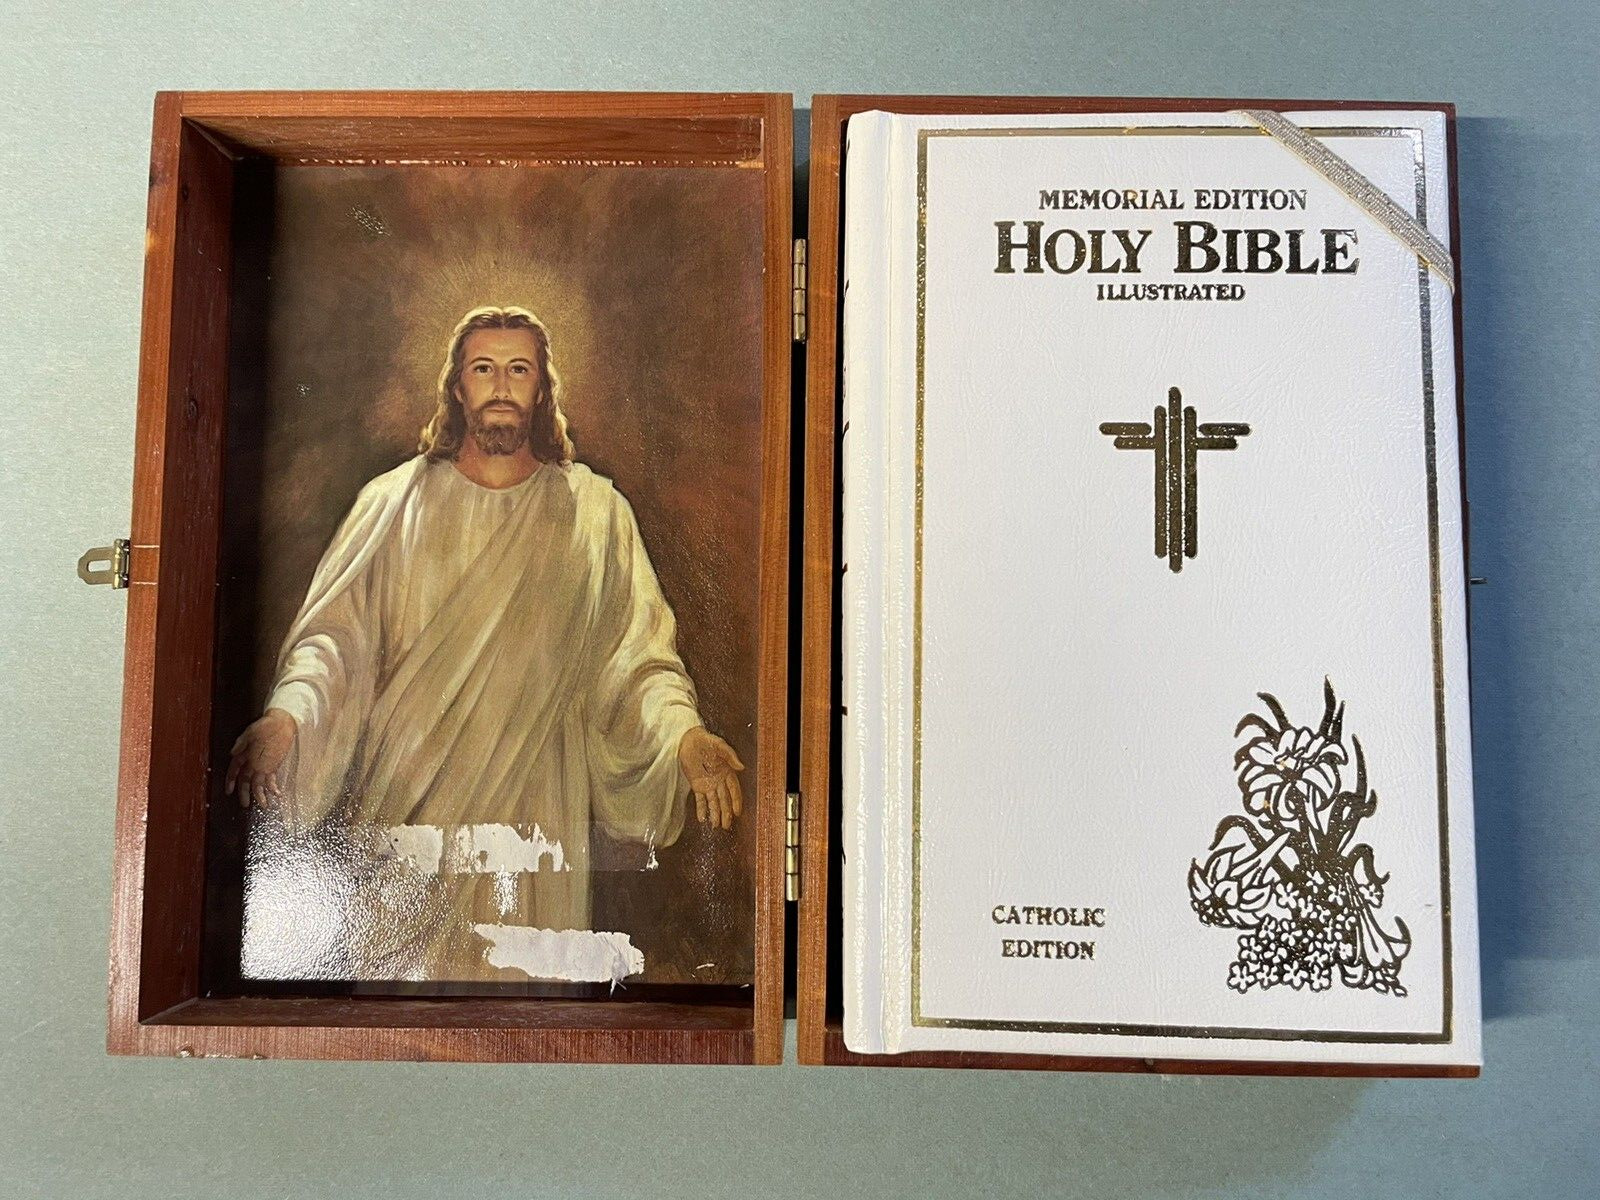 Vintage THE HOLY BIBLE in a Wood Box Memorial Edition Illustrated Catholic 1976